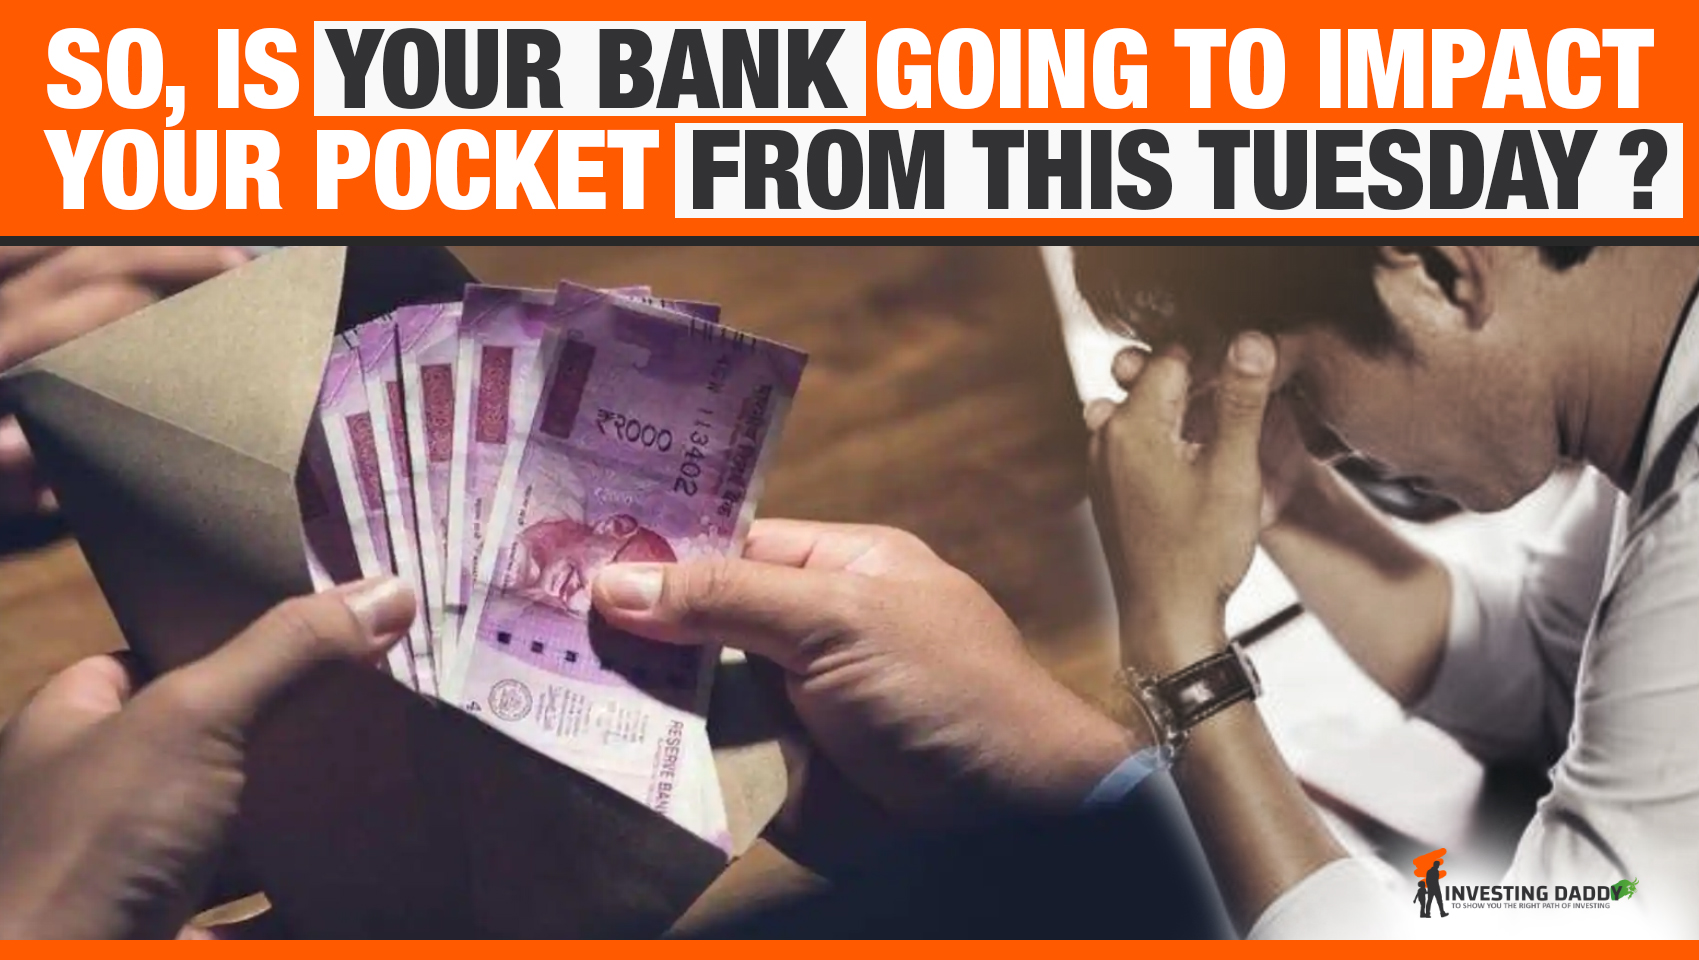 So, Is Your Bank Going to Impact Your Pocket from This Tuesday?